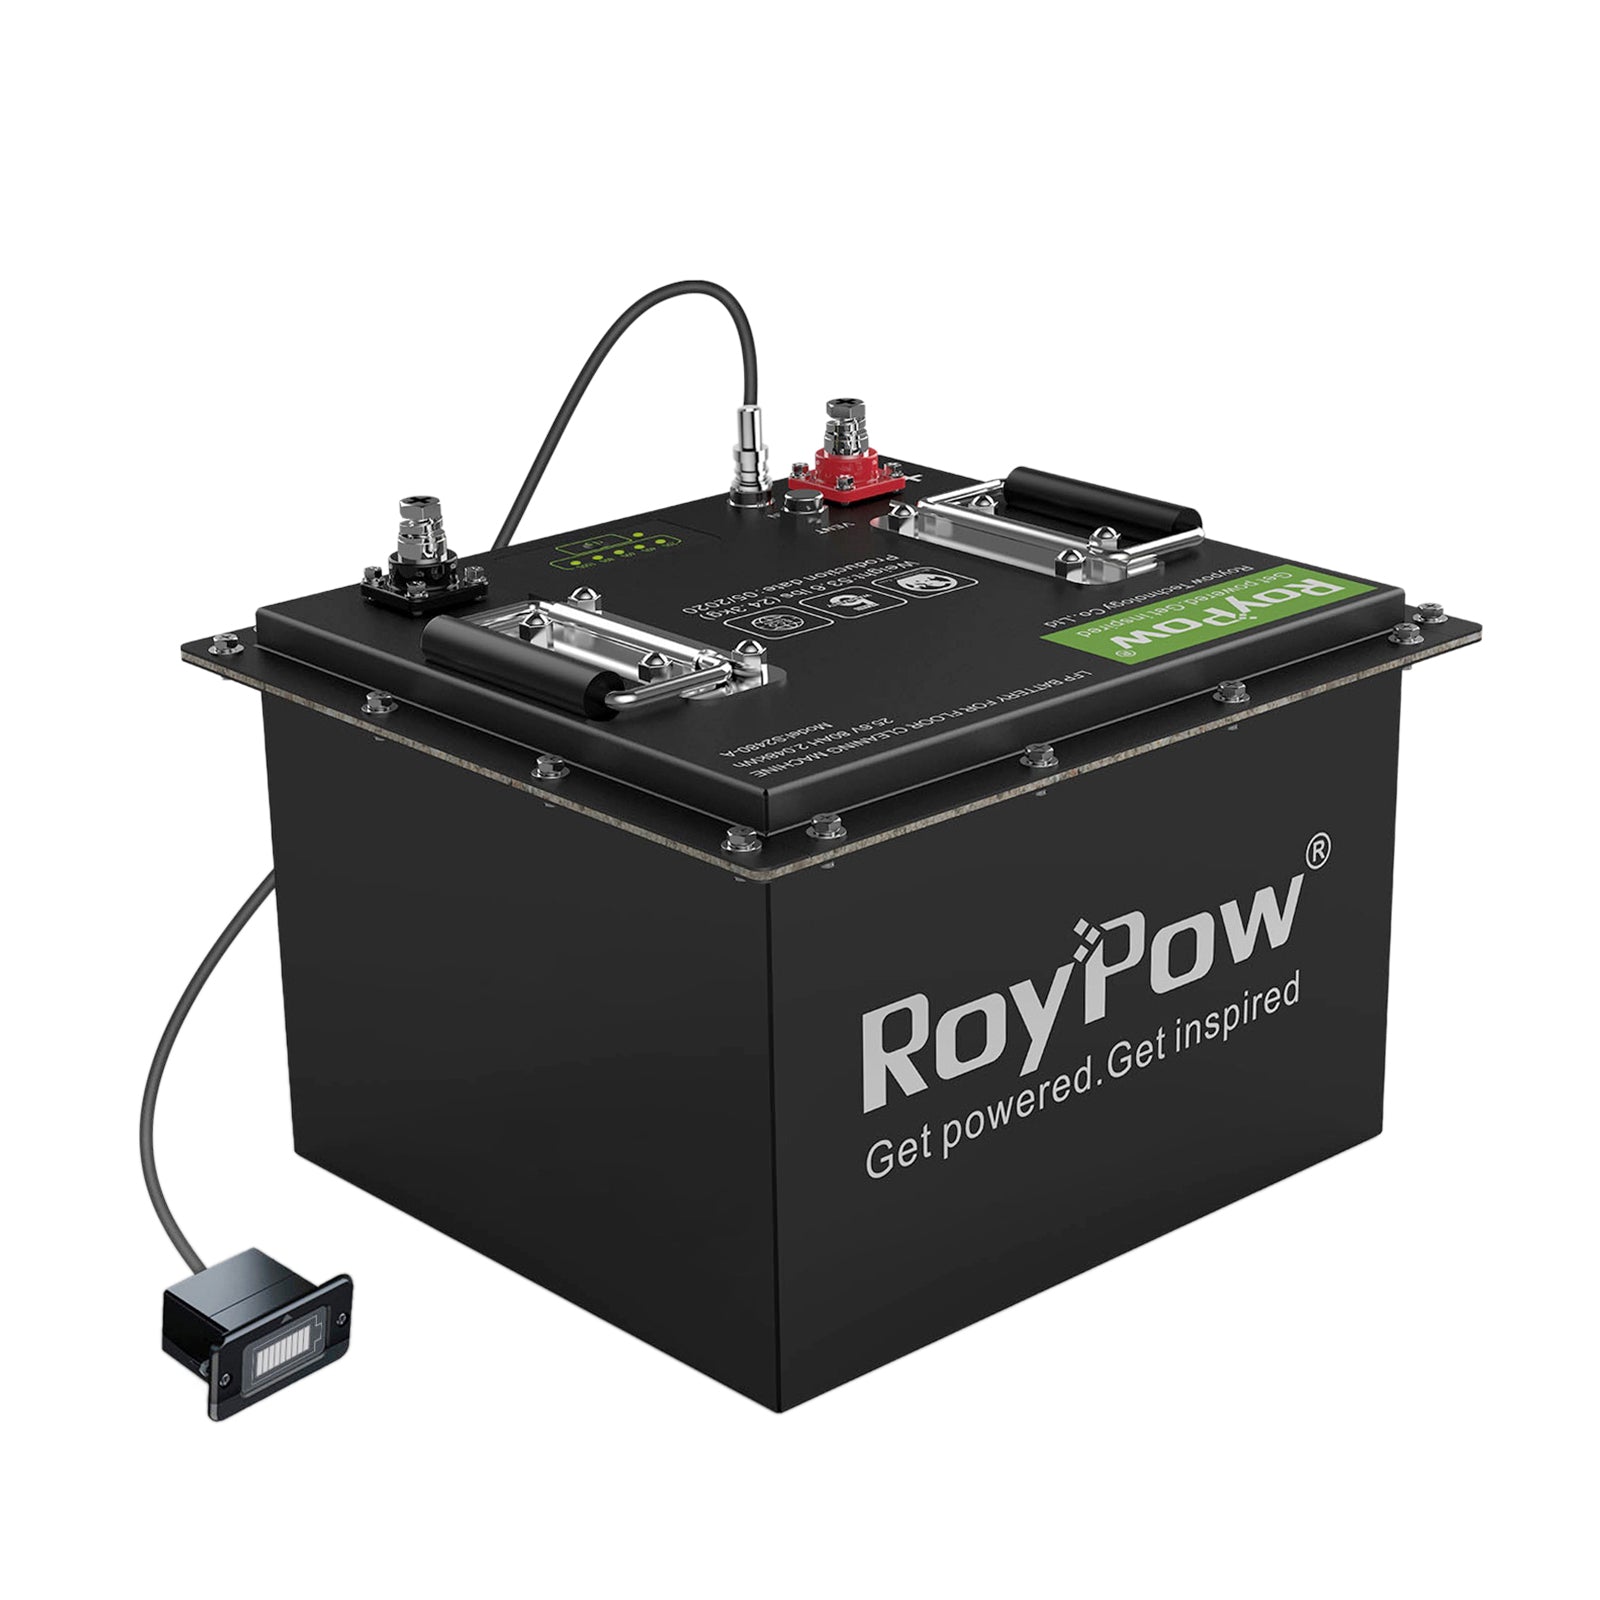 RoyPow 12V 30AH lithium iron phosphate deep cycle rechargeable battery